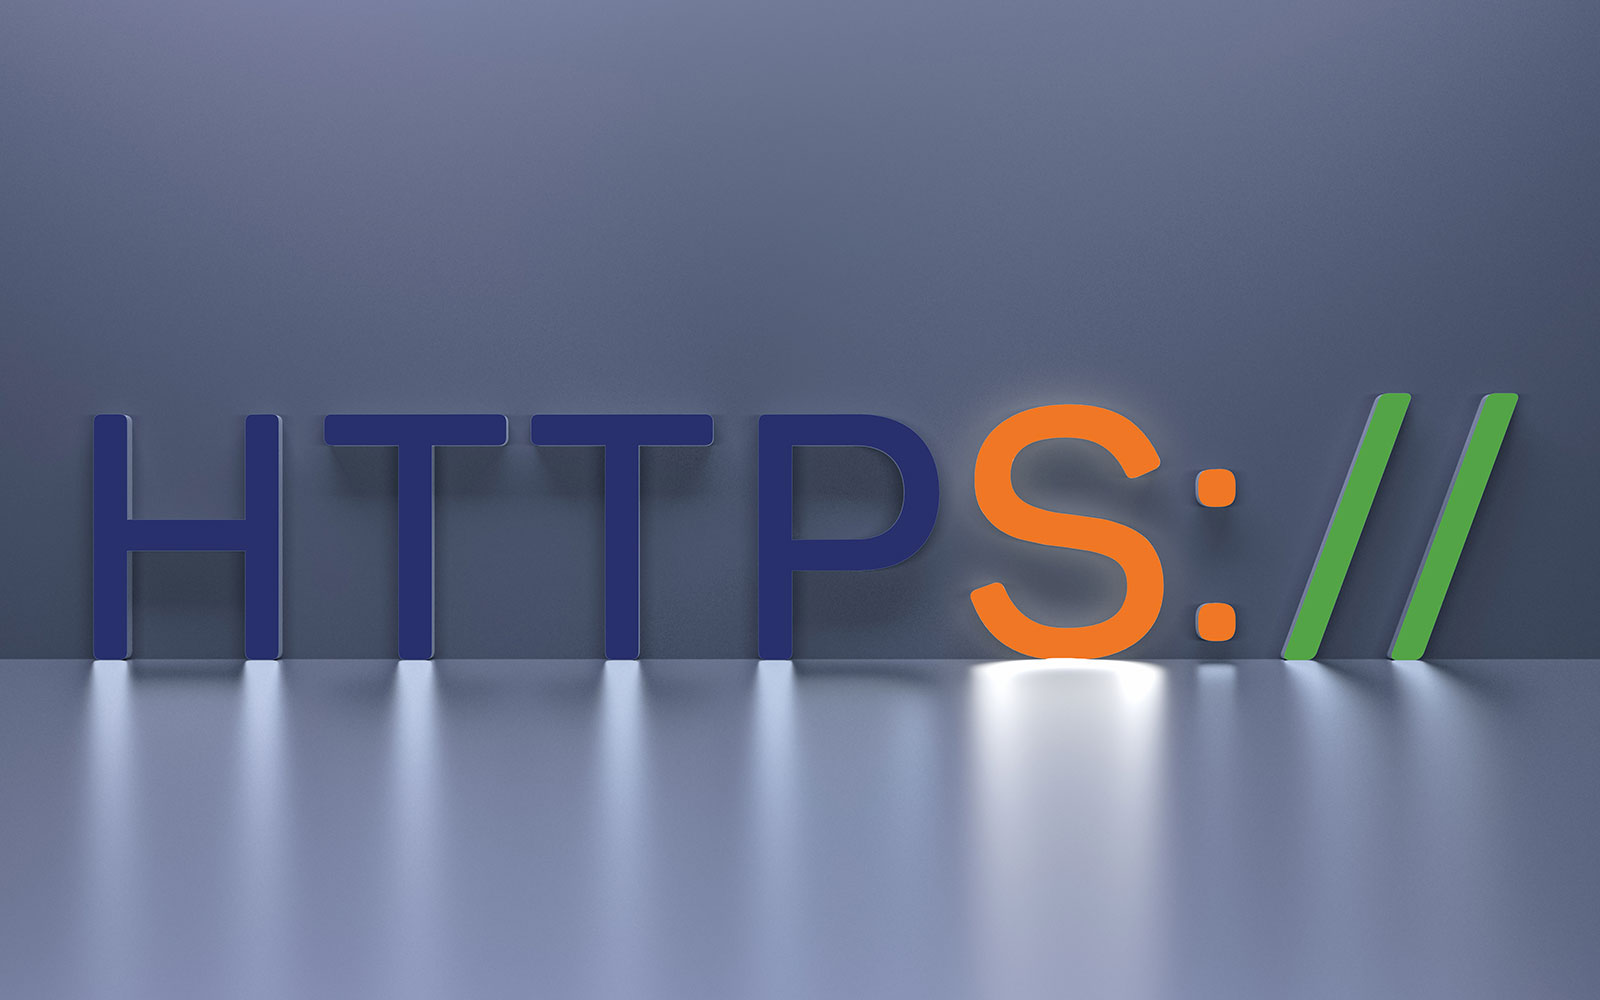 Why No HTTPS? The Most Popular Websites in Angola Still Loaded